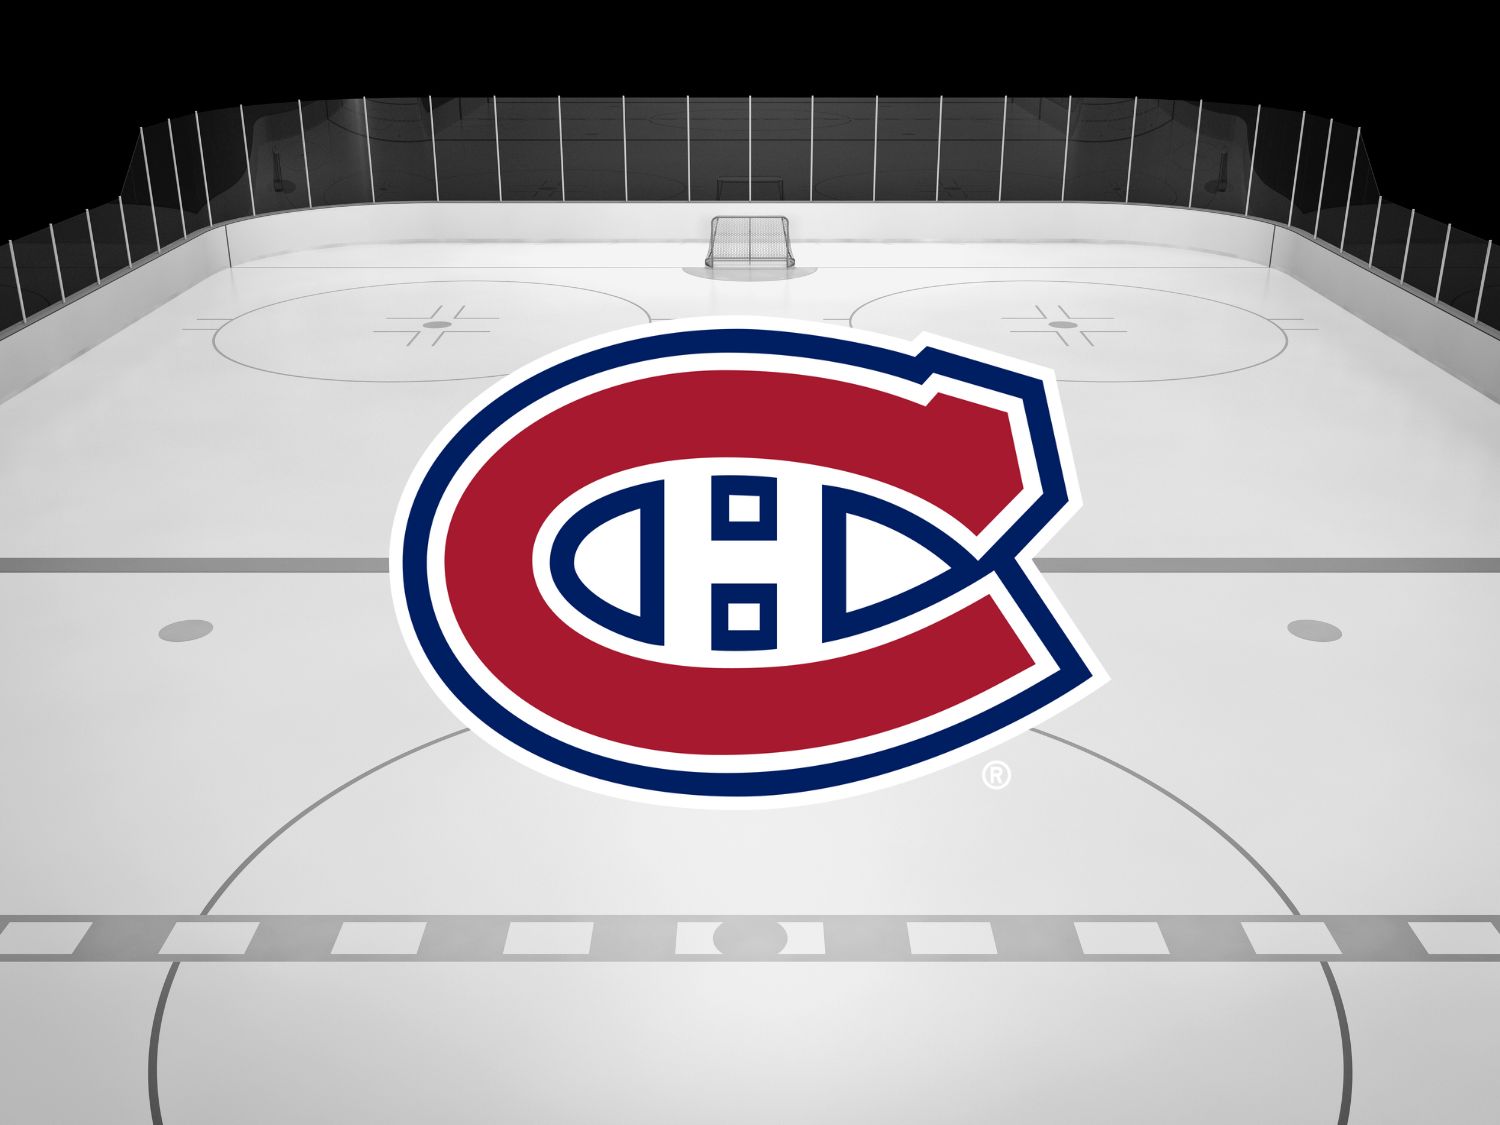 Montreal Canadiens Tickets and Seats